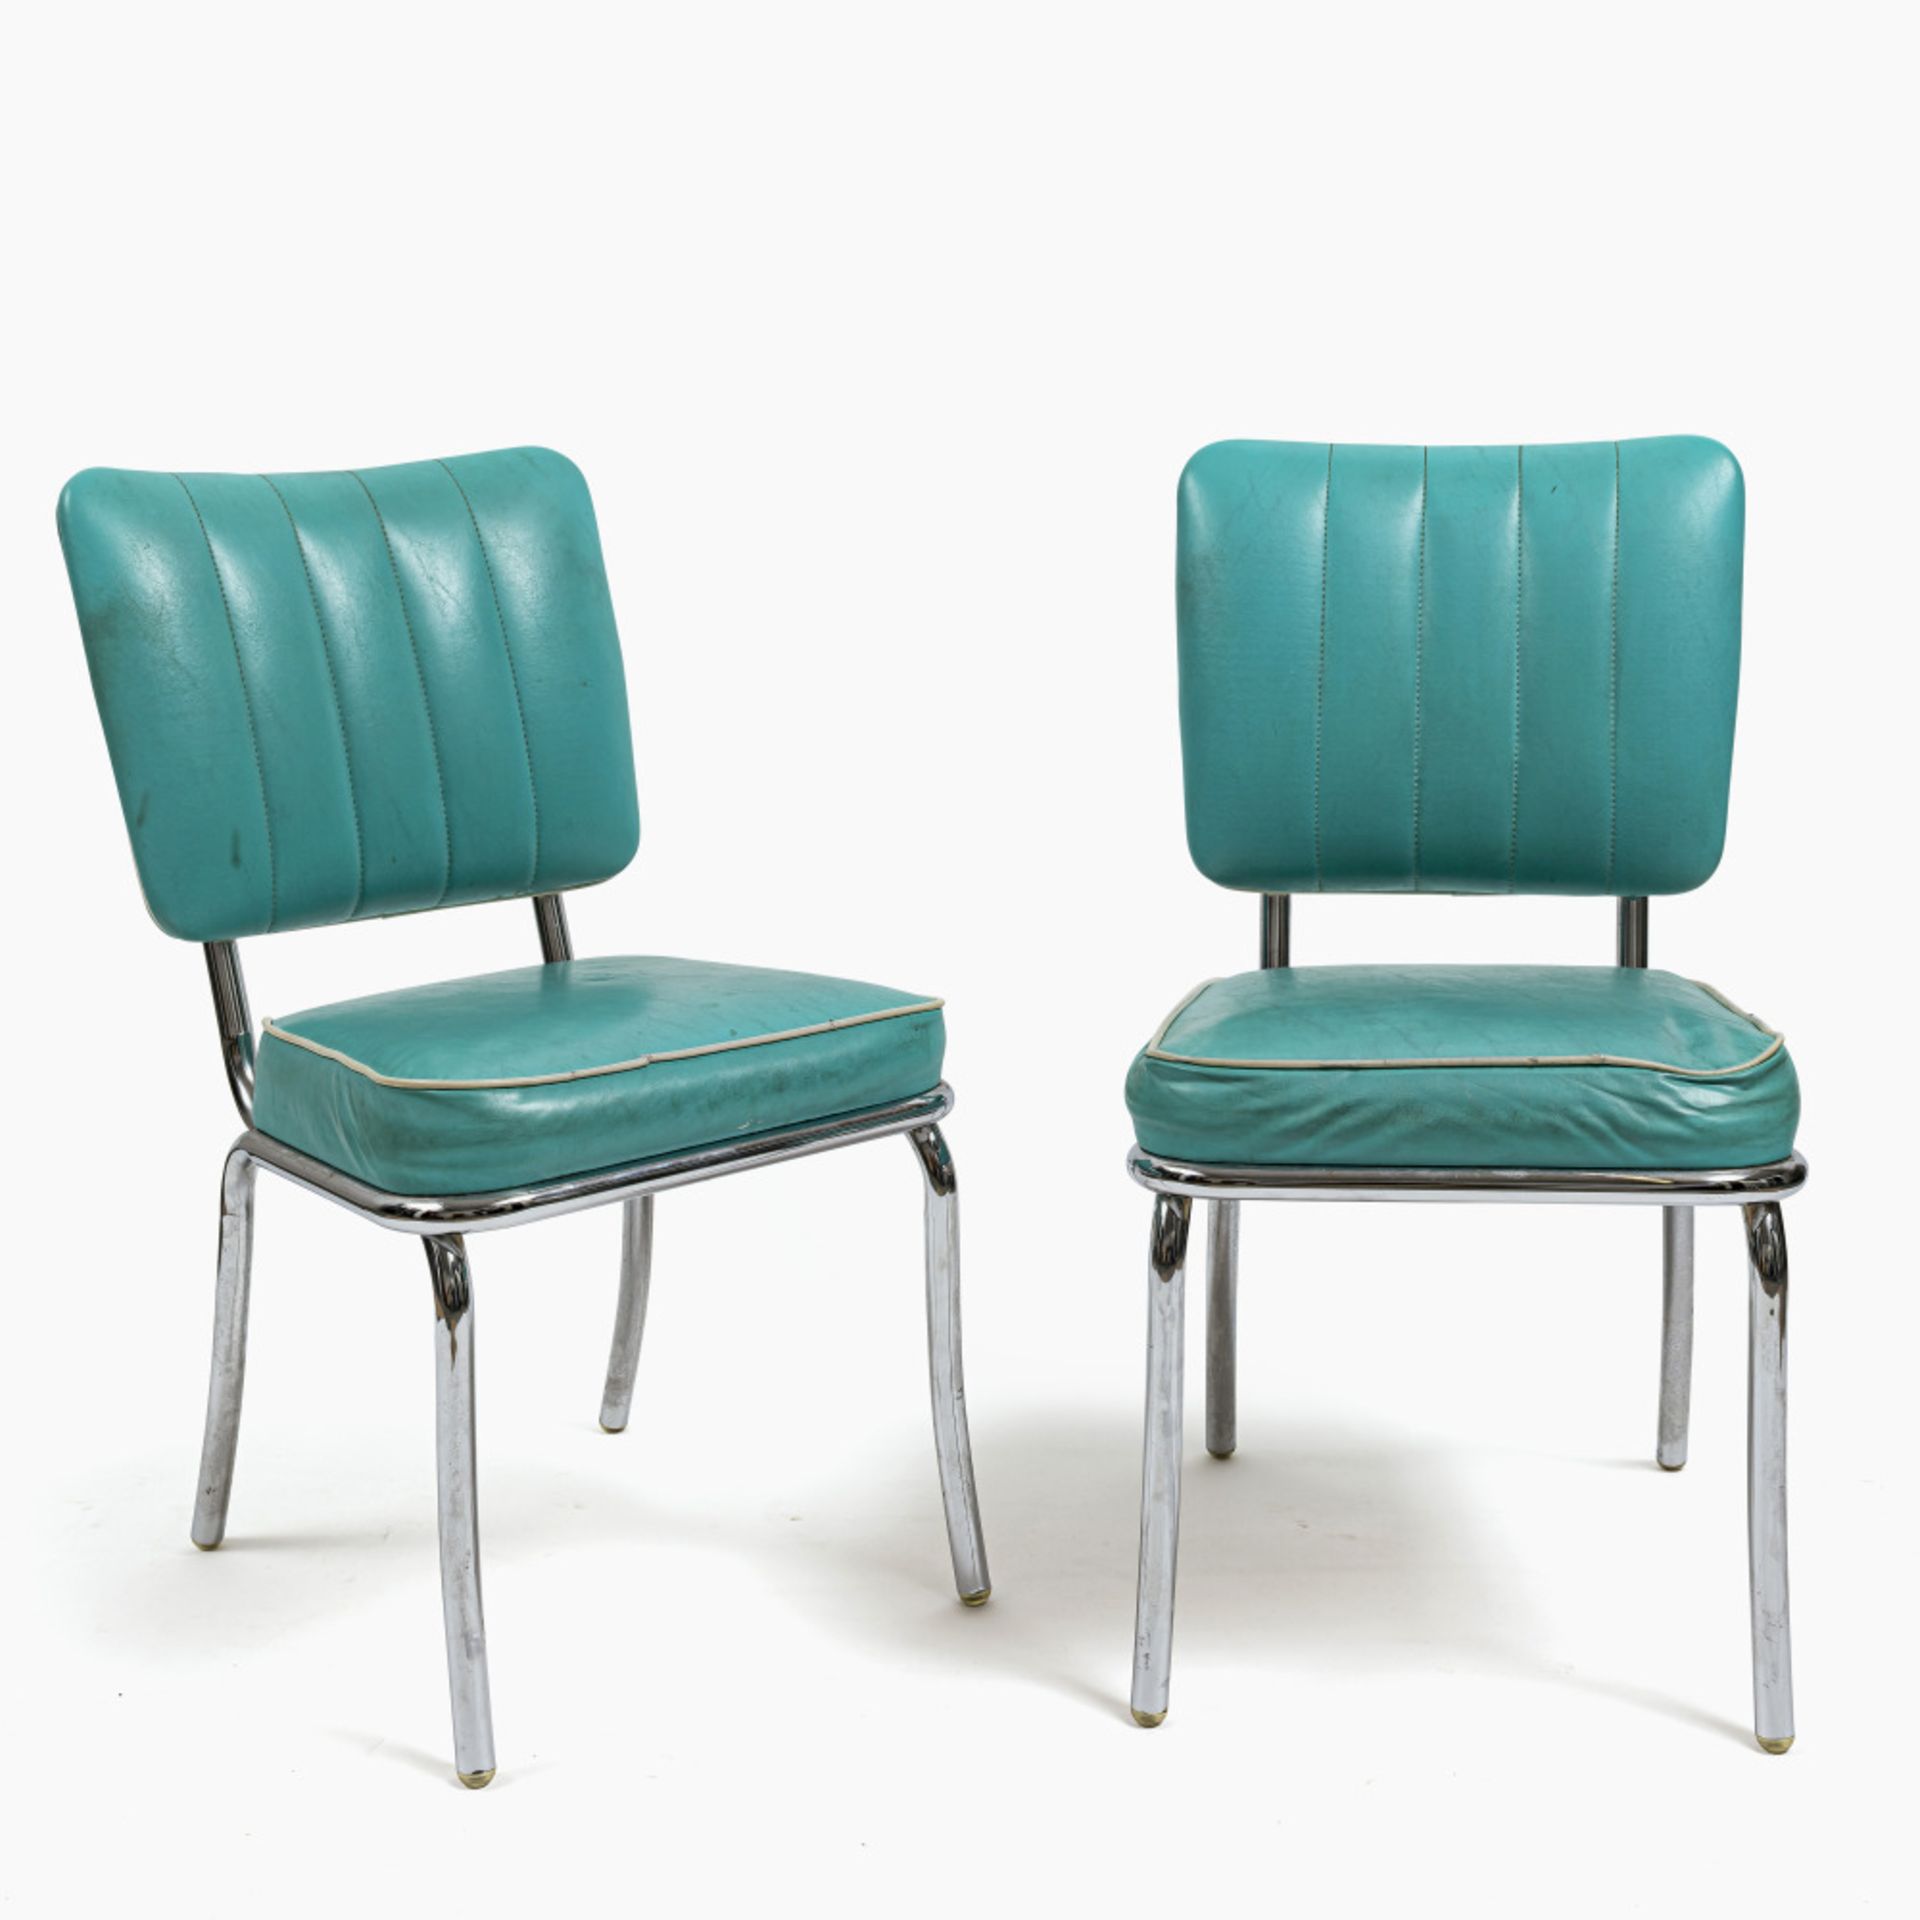 A pair of diner chairs - USA